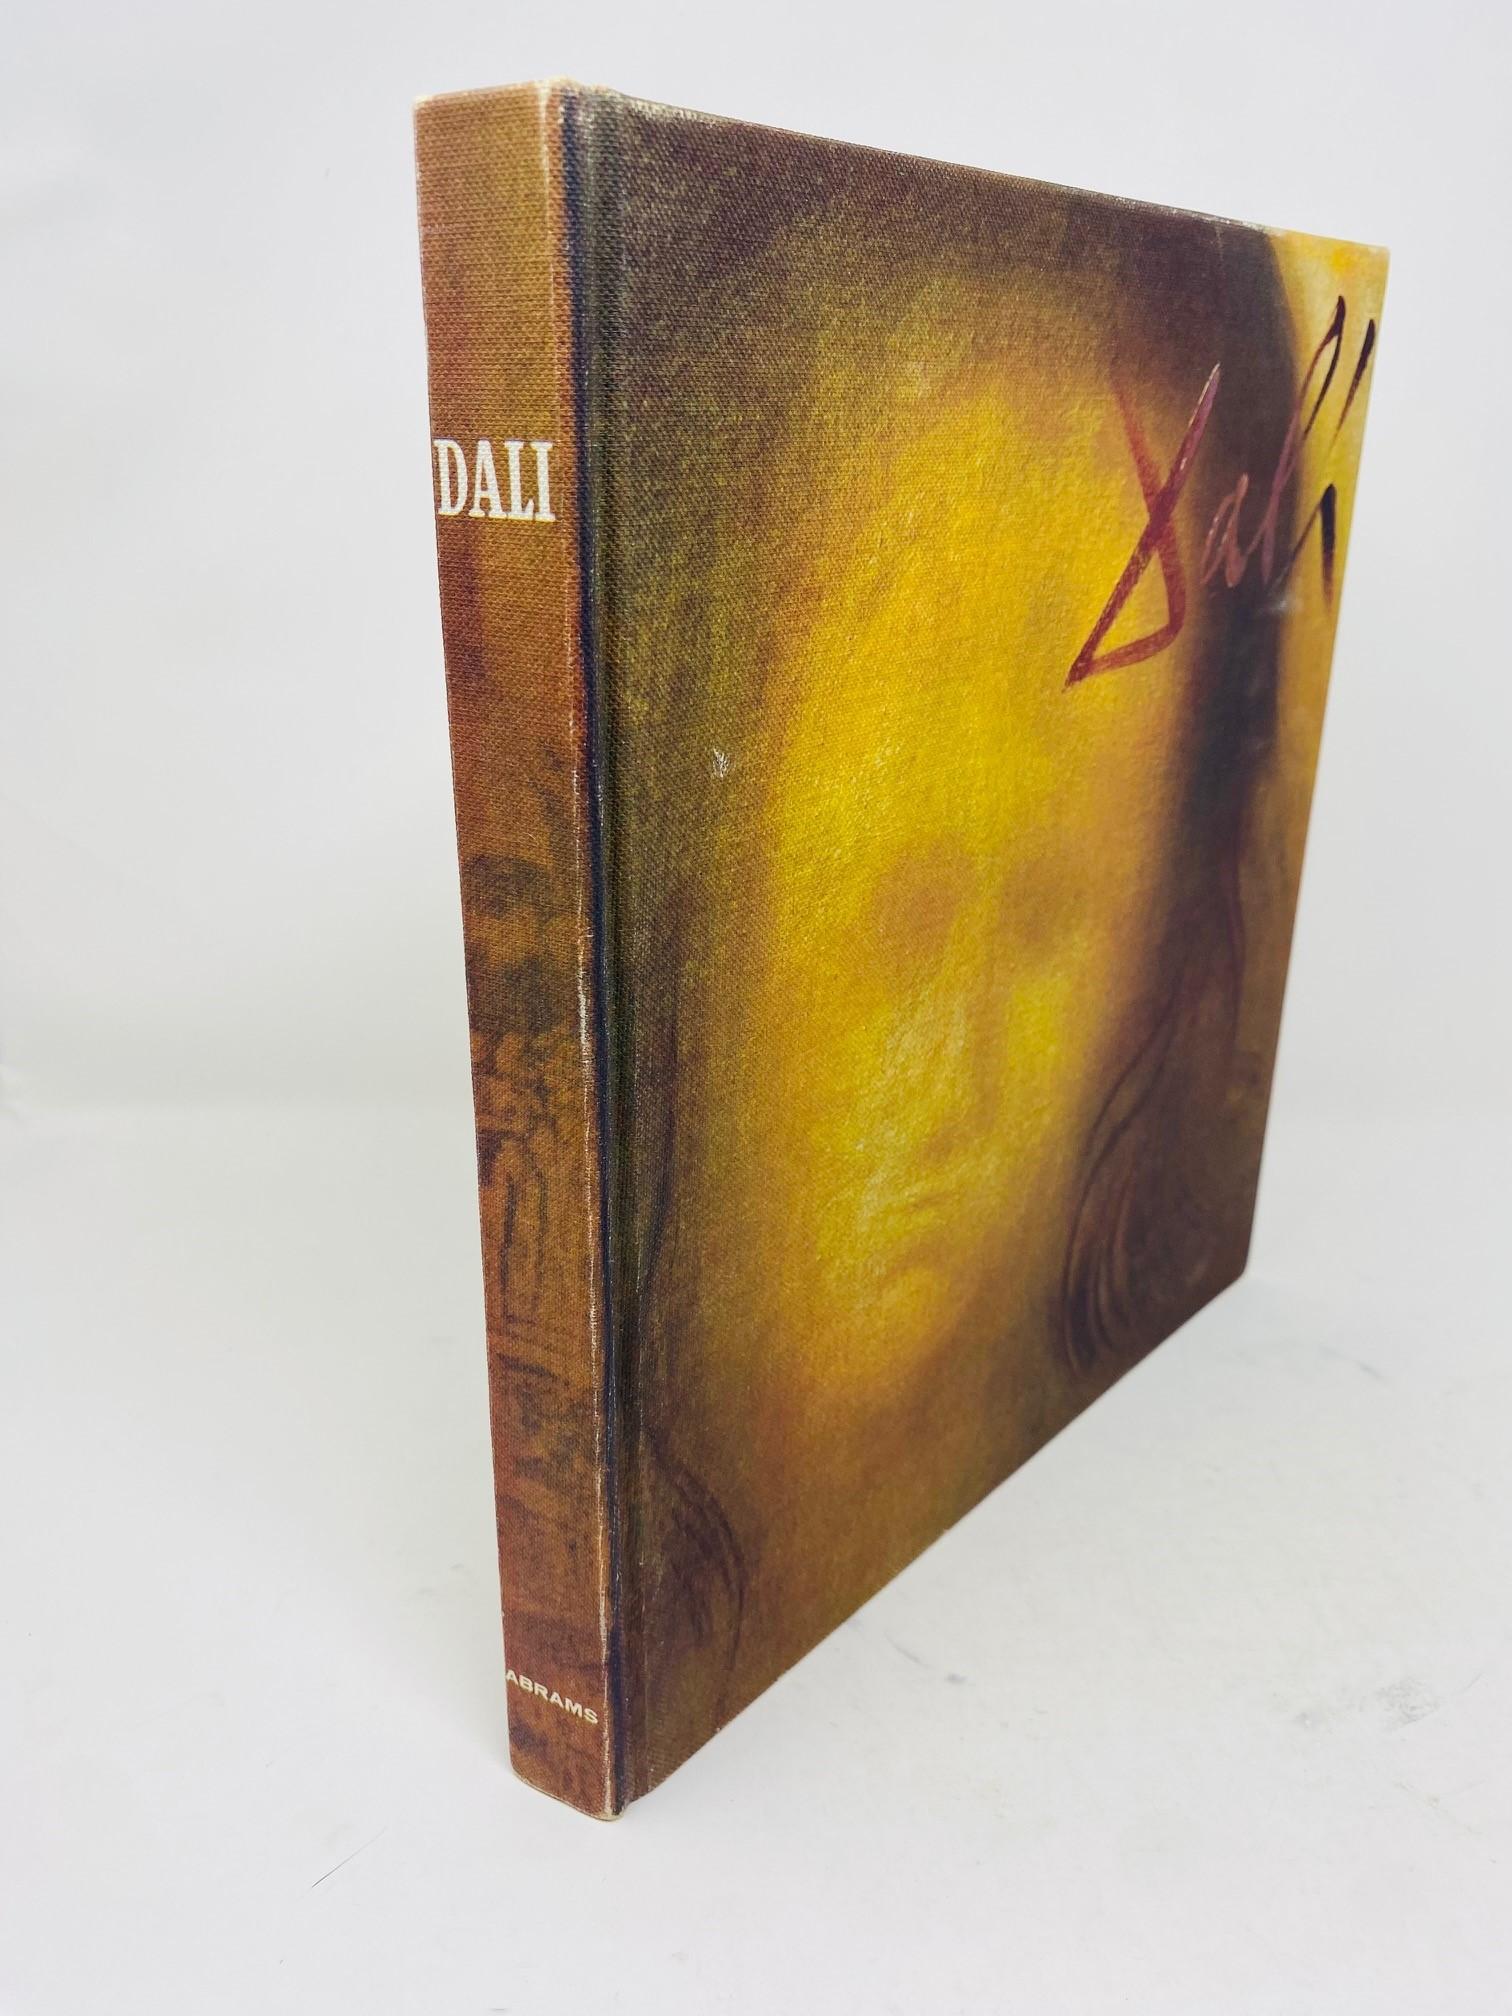 Mid-Century Modern Vintage 1968 Edition Dali de Draeger by Max Gerard Book Art Table Book For Sale